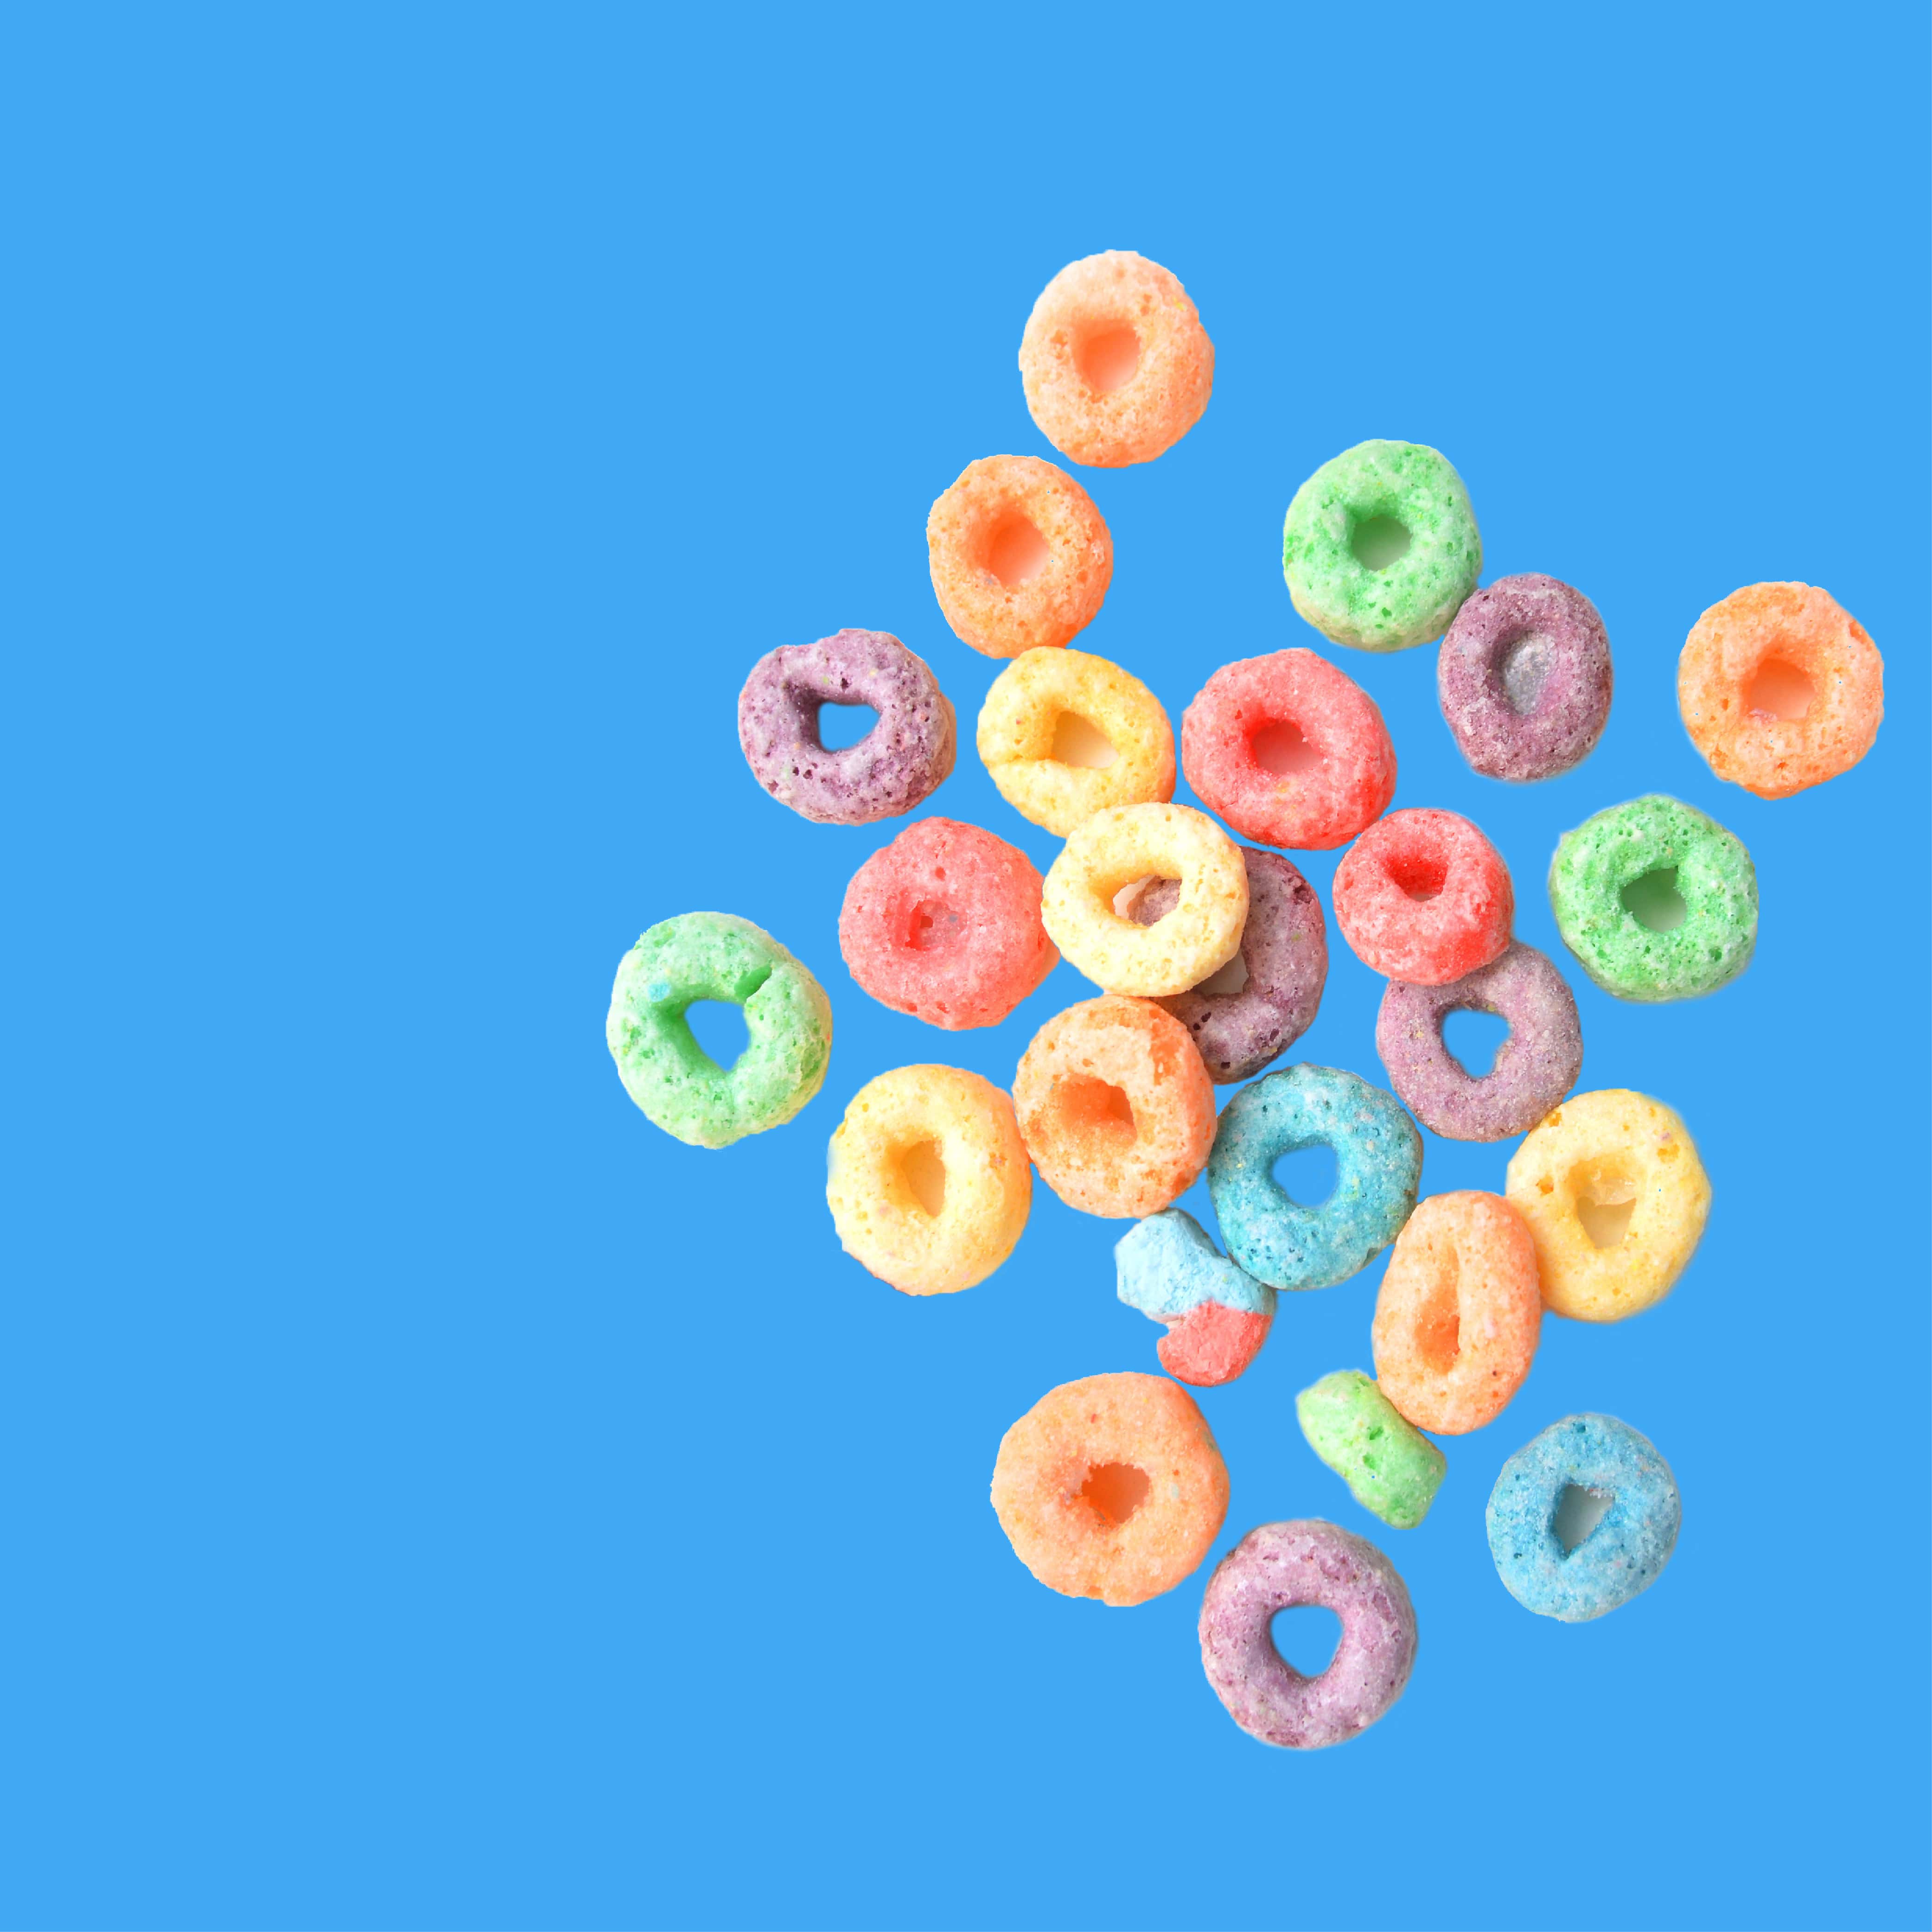 Fruit Loops - Fragrance Oil - CandleWax